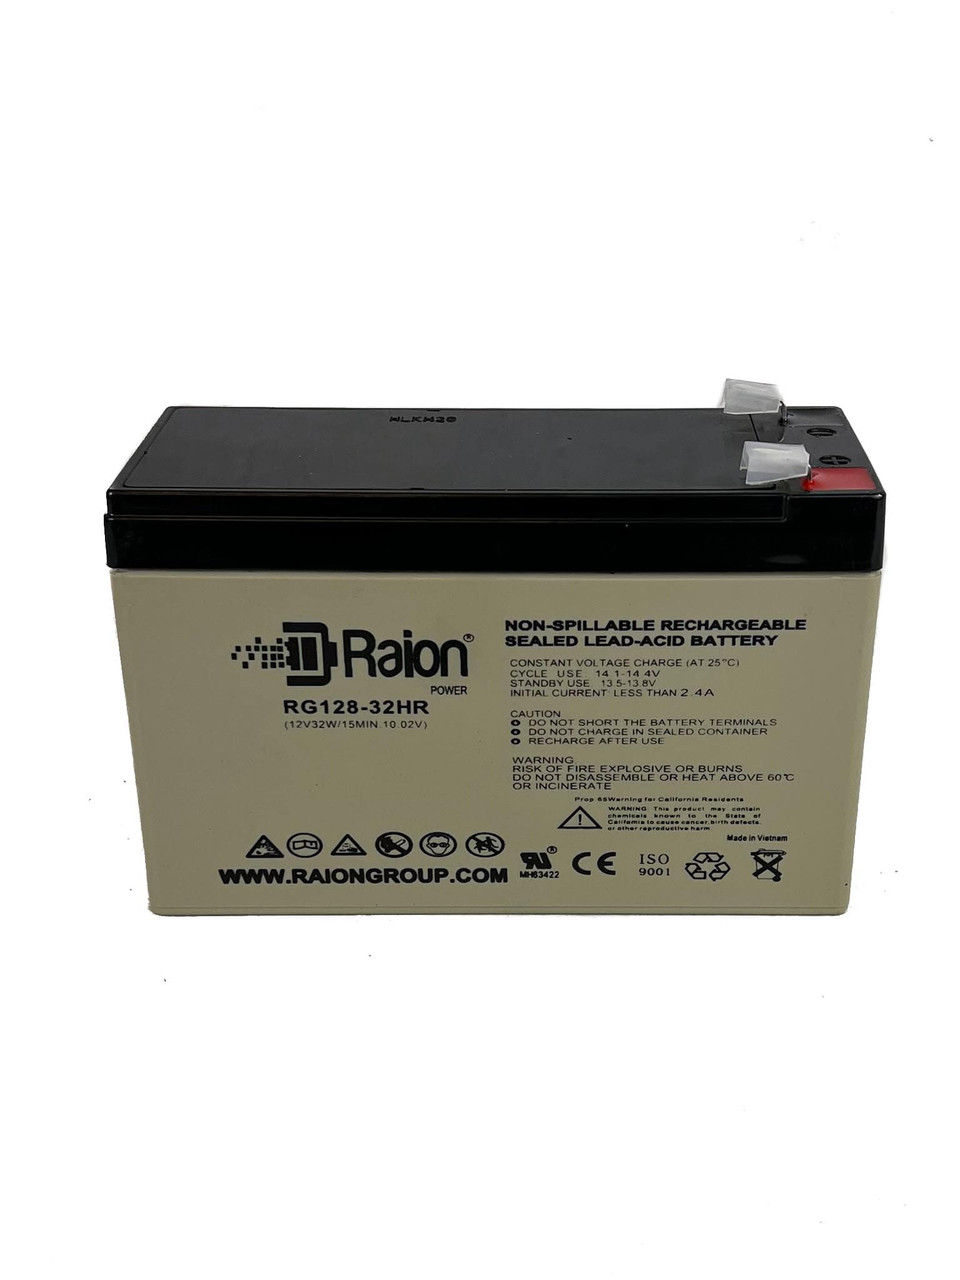 Raion Power RG128-32HR Replacement High Rate Battery Cartridge for Clary UPS1400VA1GSL